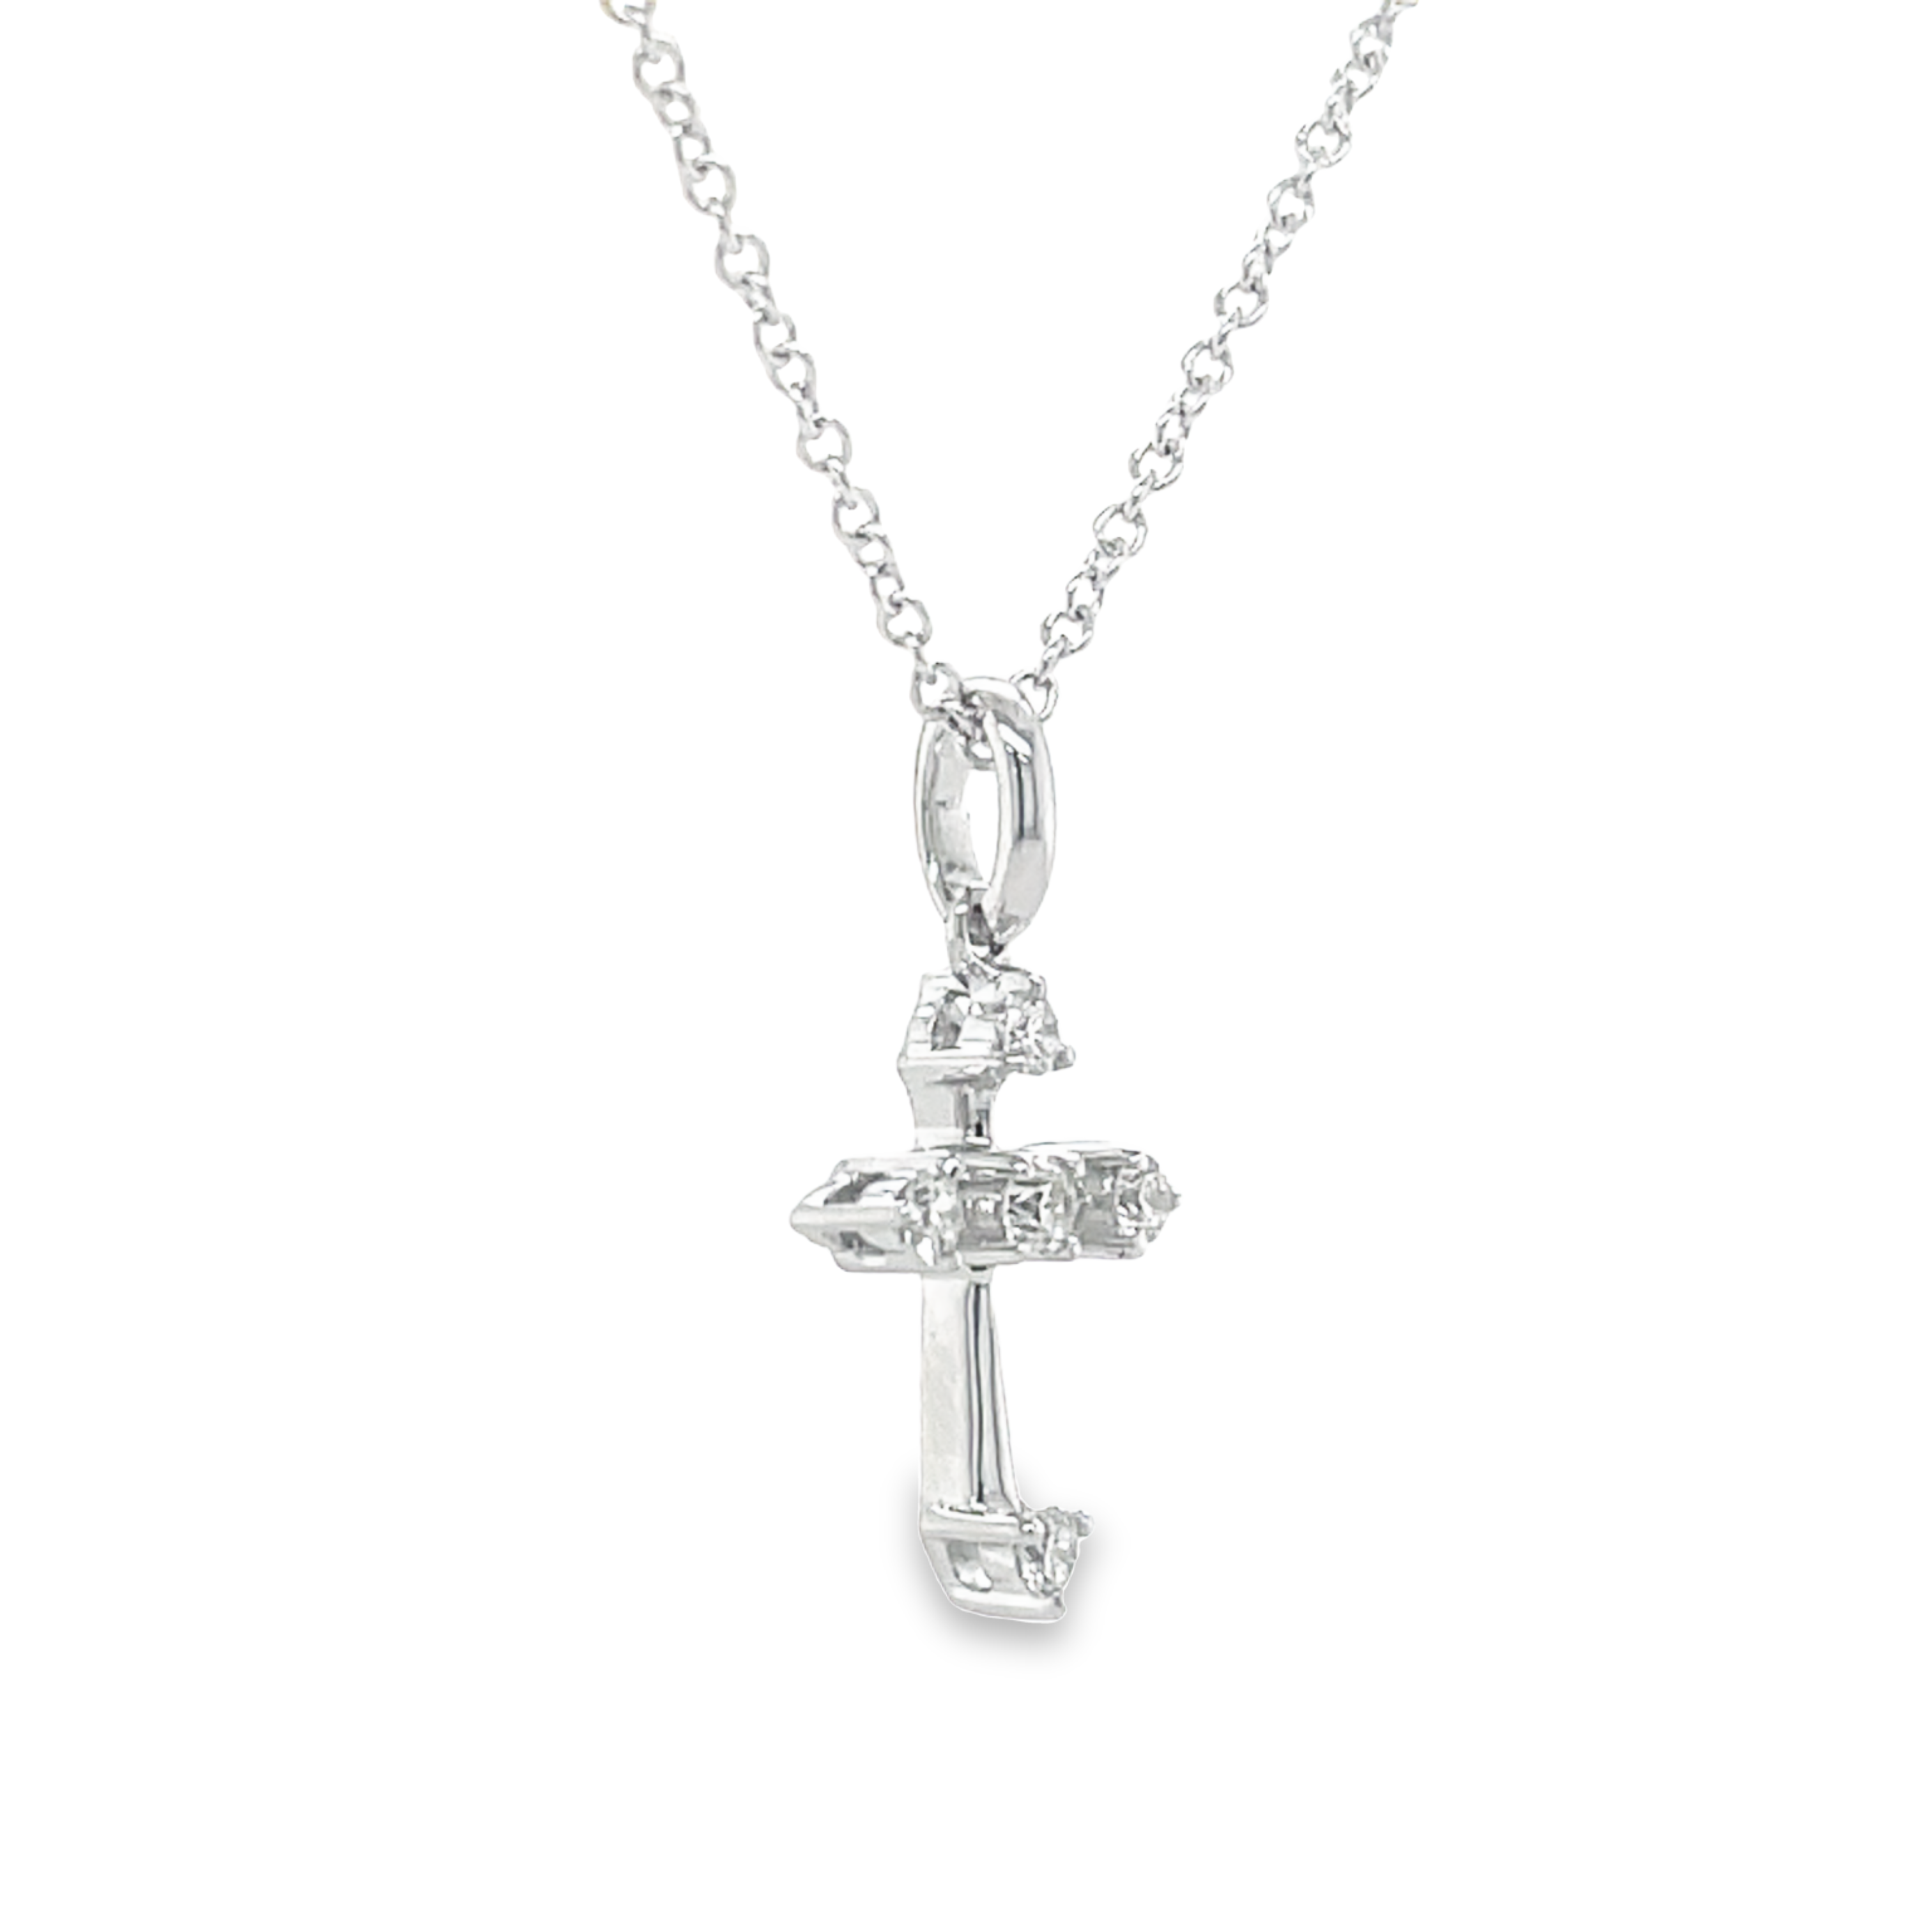 This dazzling 18k white gold cross sparkles with five round, high quality diamonds in color E/F-VS1 totaling 0.08 cts and a secure bail. An optional 1.3 mm ($299) chain is available.